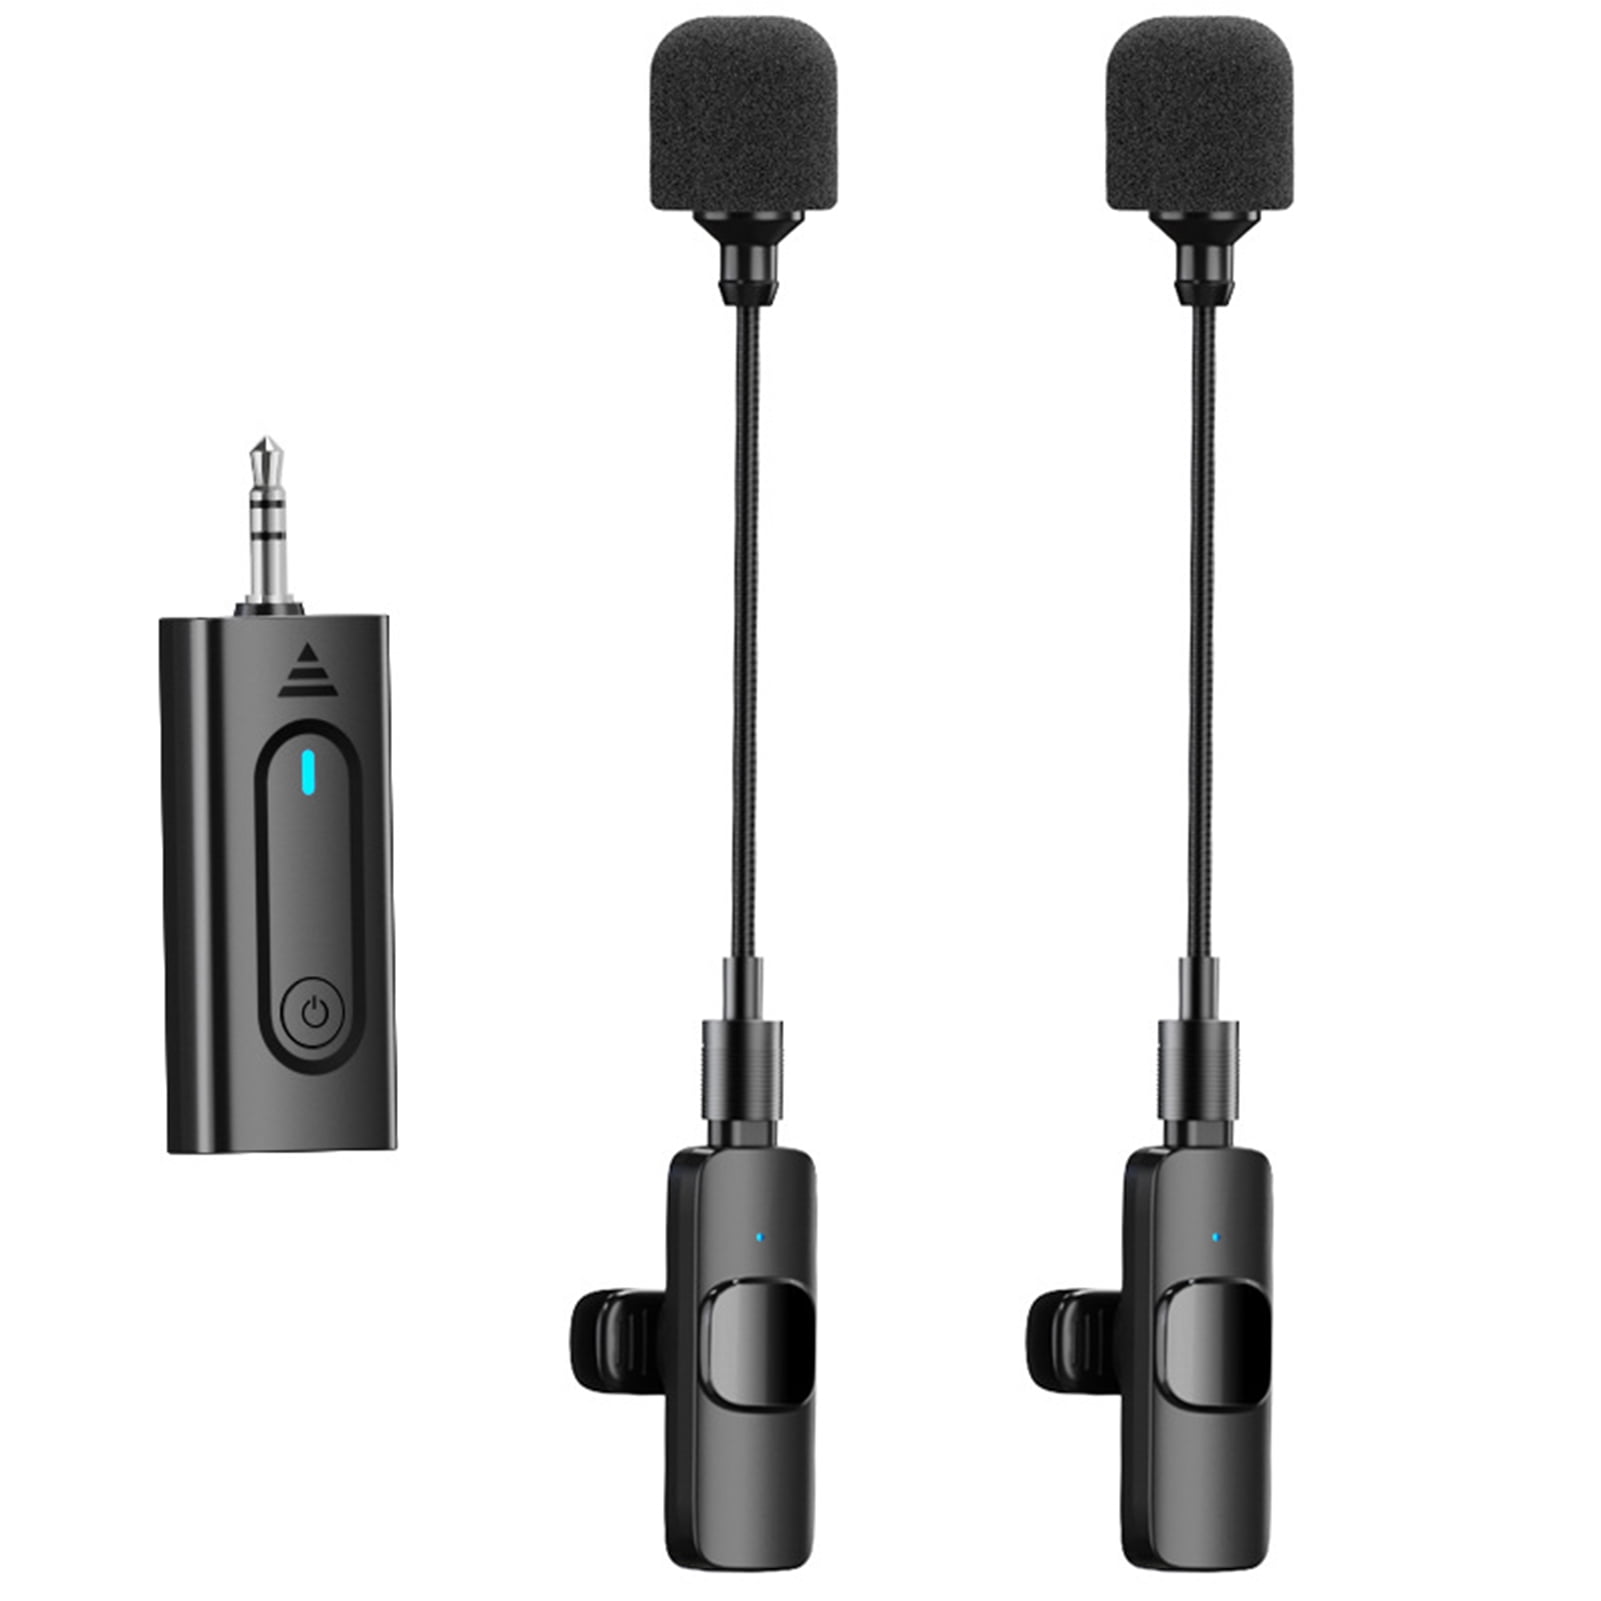 Yesbay Lavalier Microphone Plug-Play Low Latency Stable